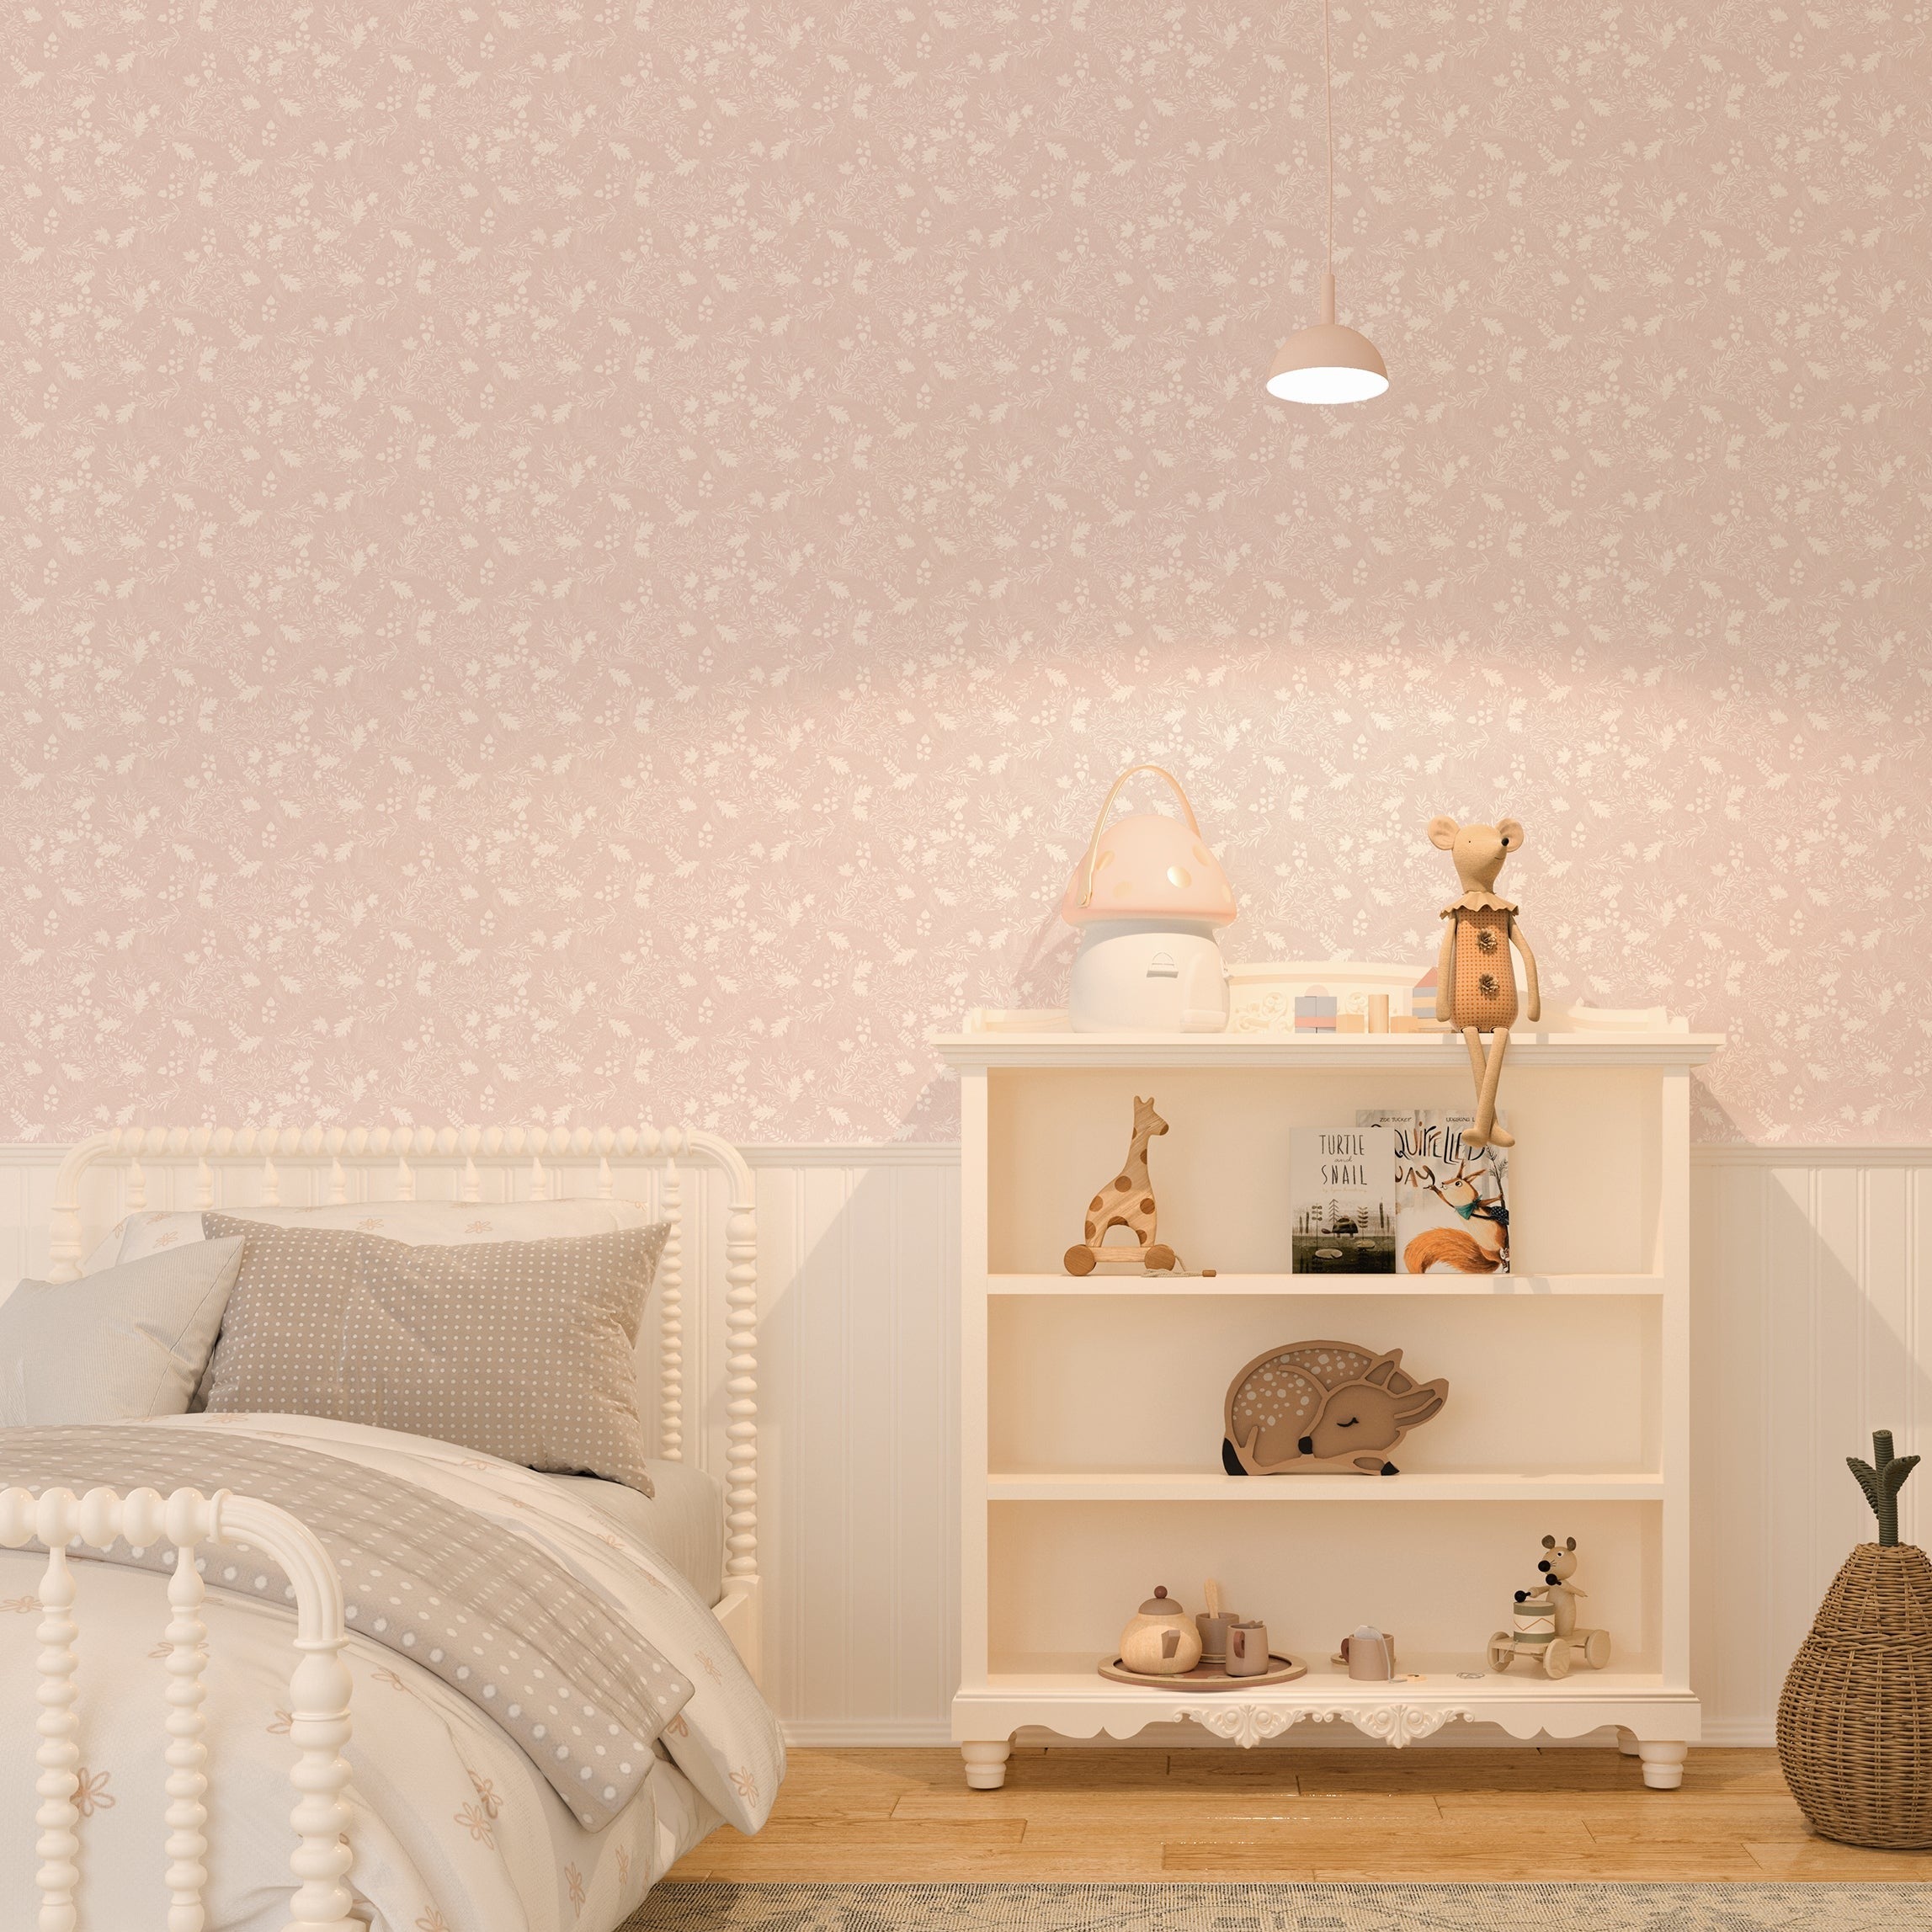 A cozy nursery featuring Whispering Woodland wallpaper with its white leaf patterns on a soft pink background. The room is decorated with a white bed, a shelf filled with toys, and a small pendant lamp illuminating the space.